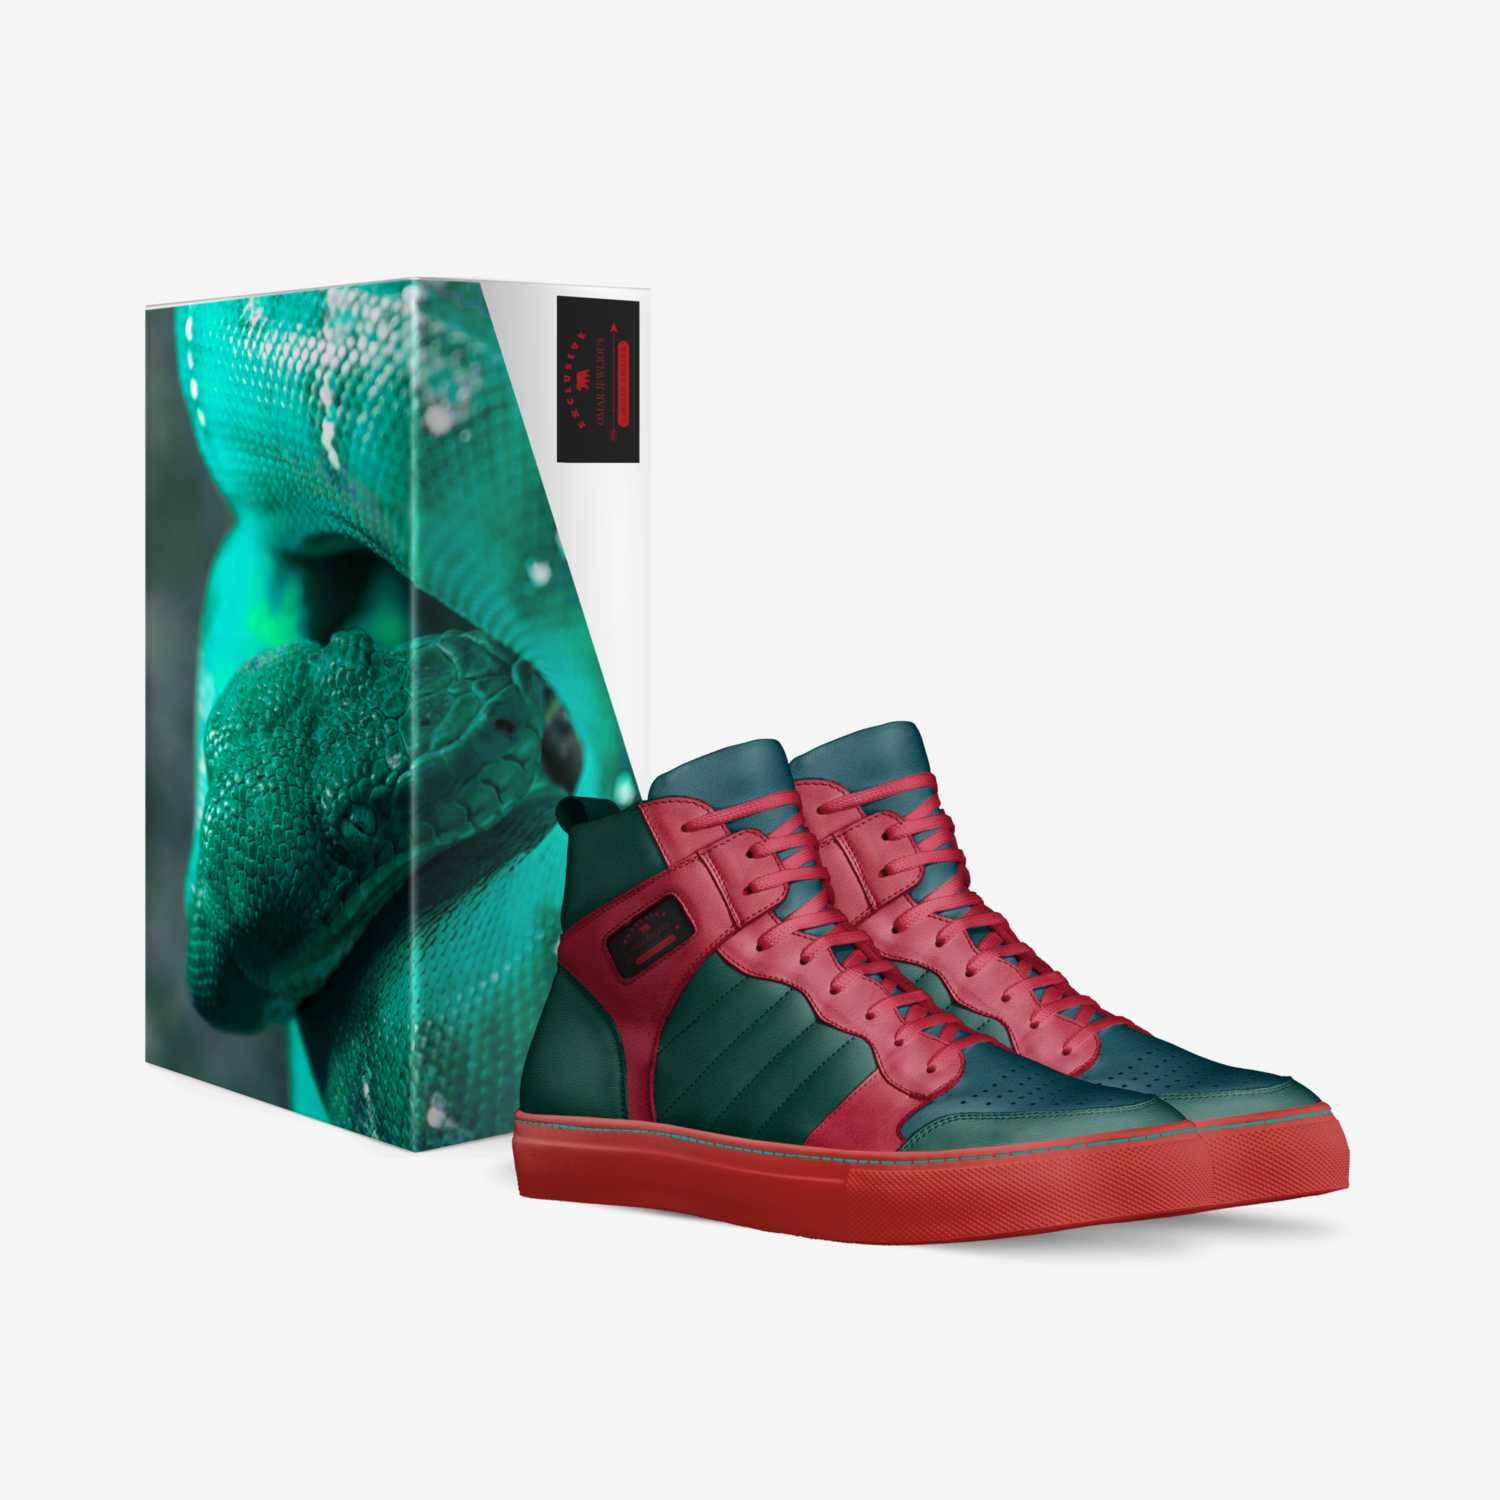 omar jewlious custom made in Italy shoes by James Beavers | Box view